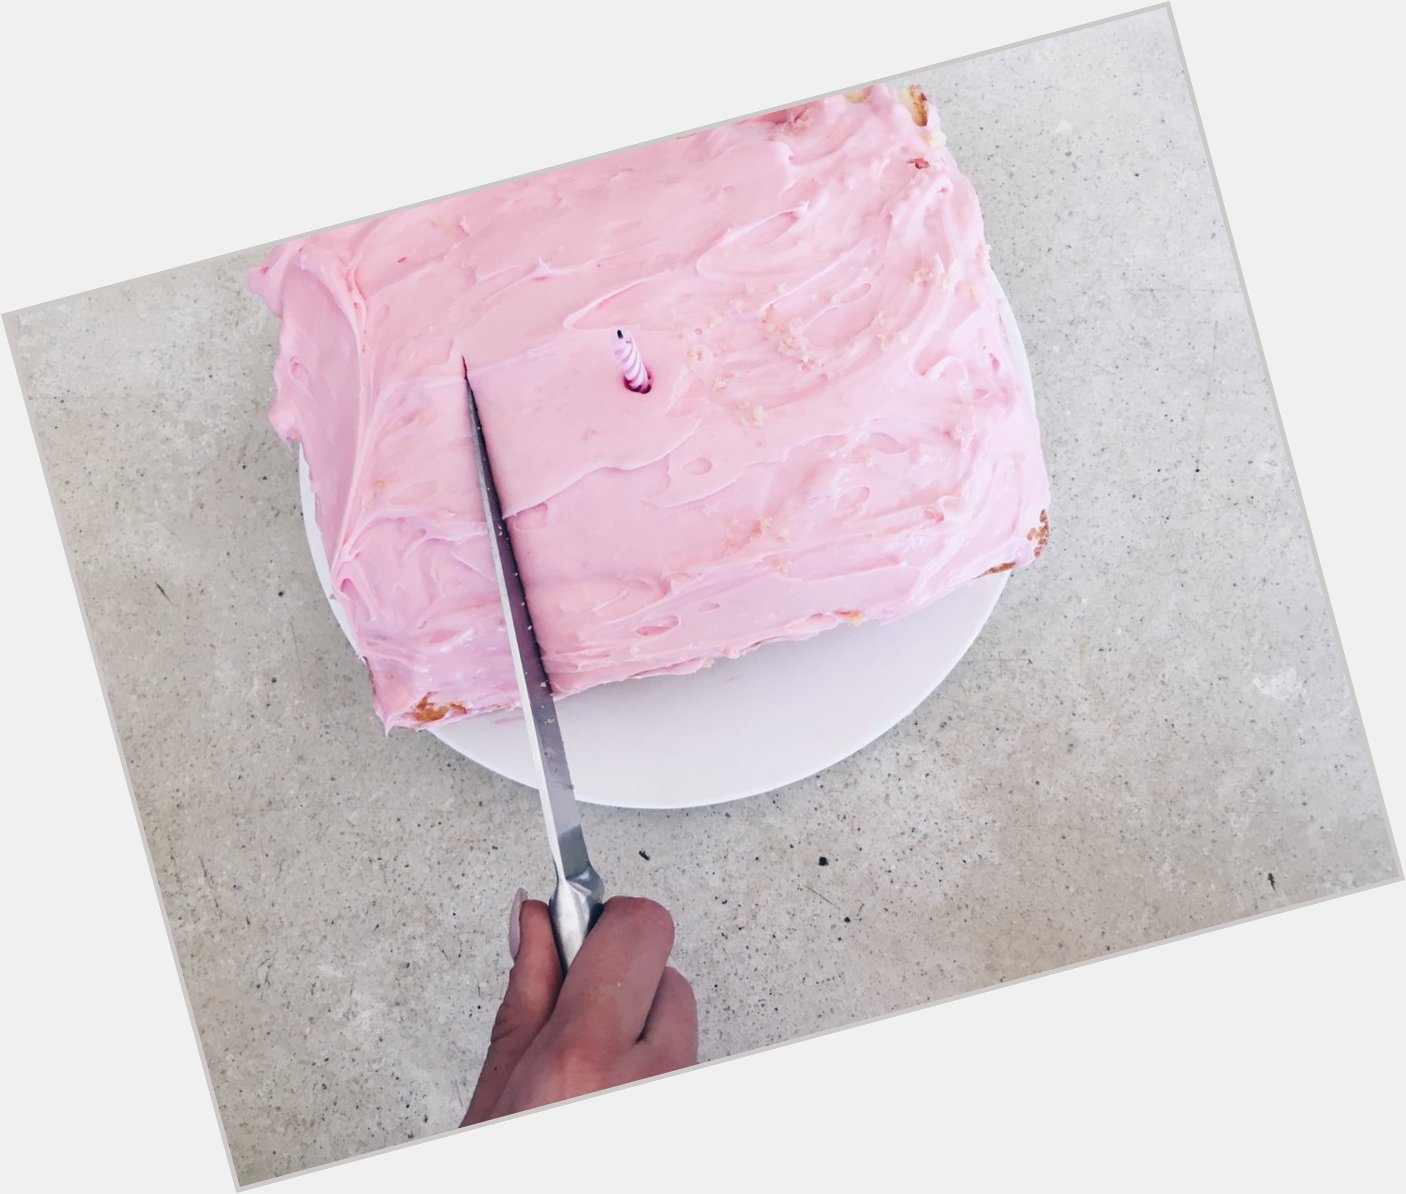 Happy birthday Wes Anderson we made you a pink cake and ate it 